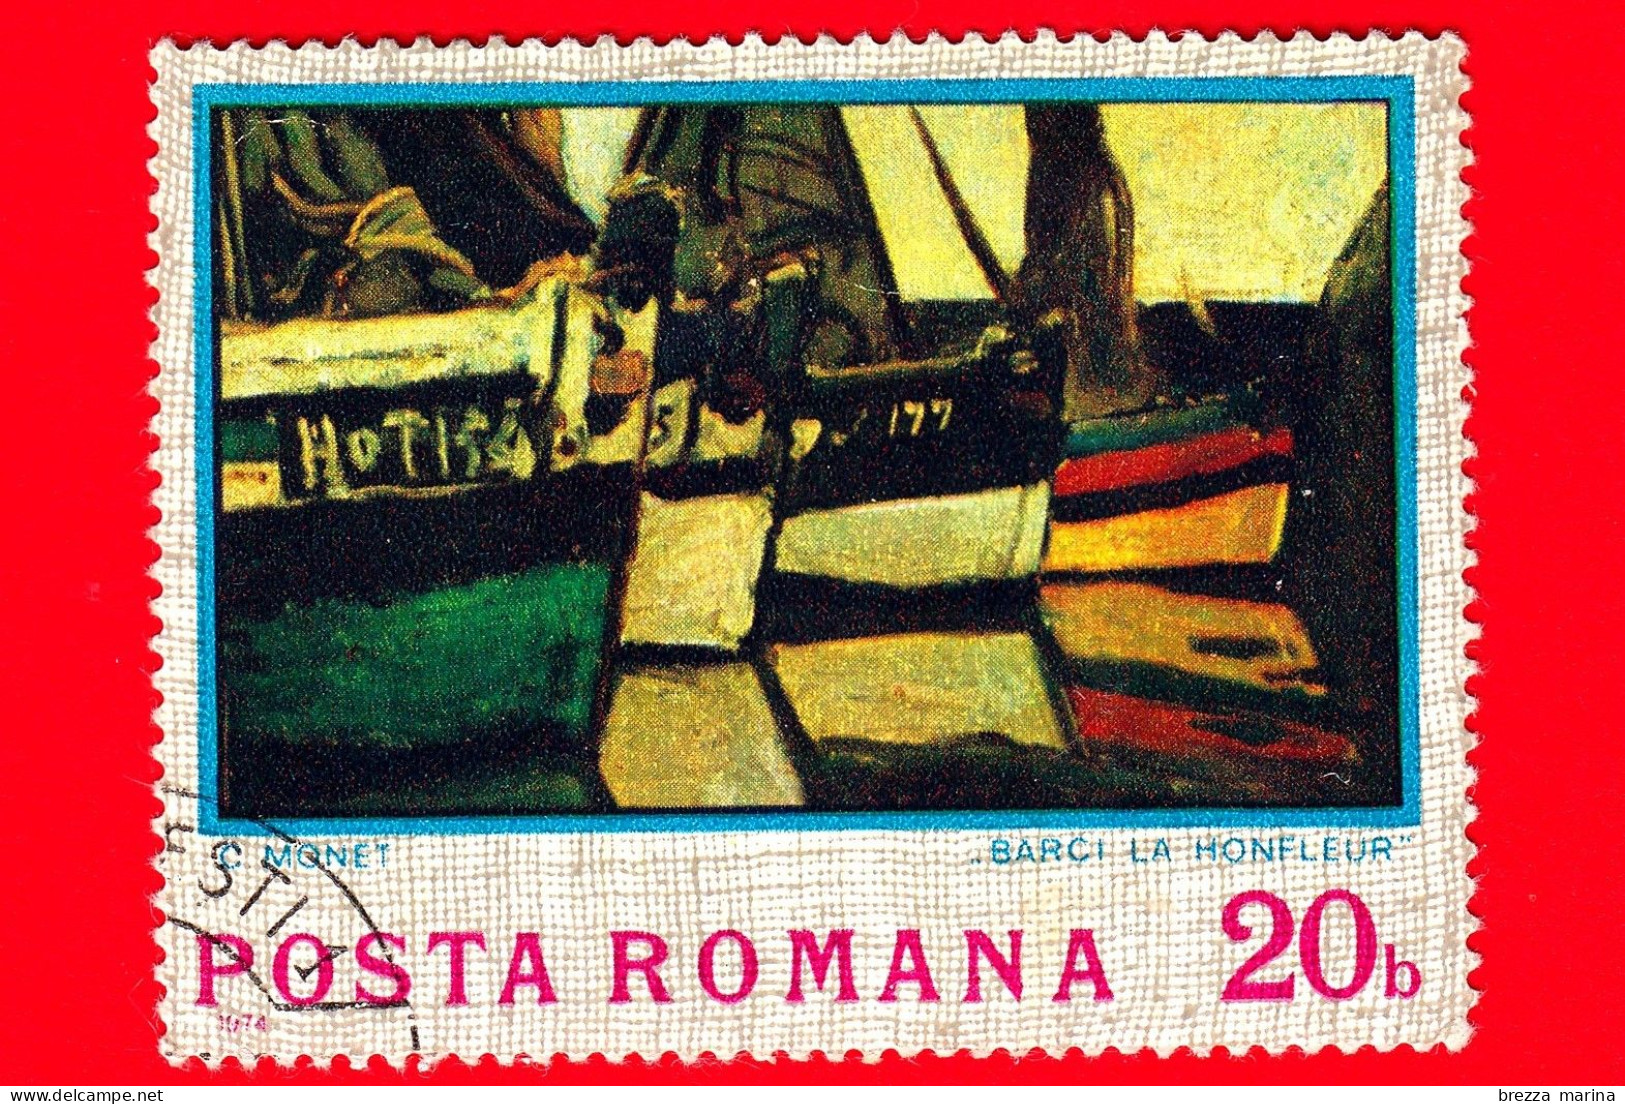 ROMANIA - 1974 - Dipinti - Impressionismo - Barche A Honfleur, Claude Monet (1840-1926) - 20 - Used Stamps